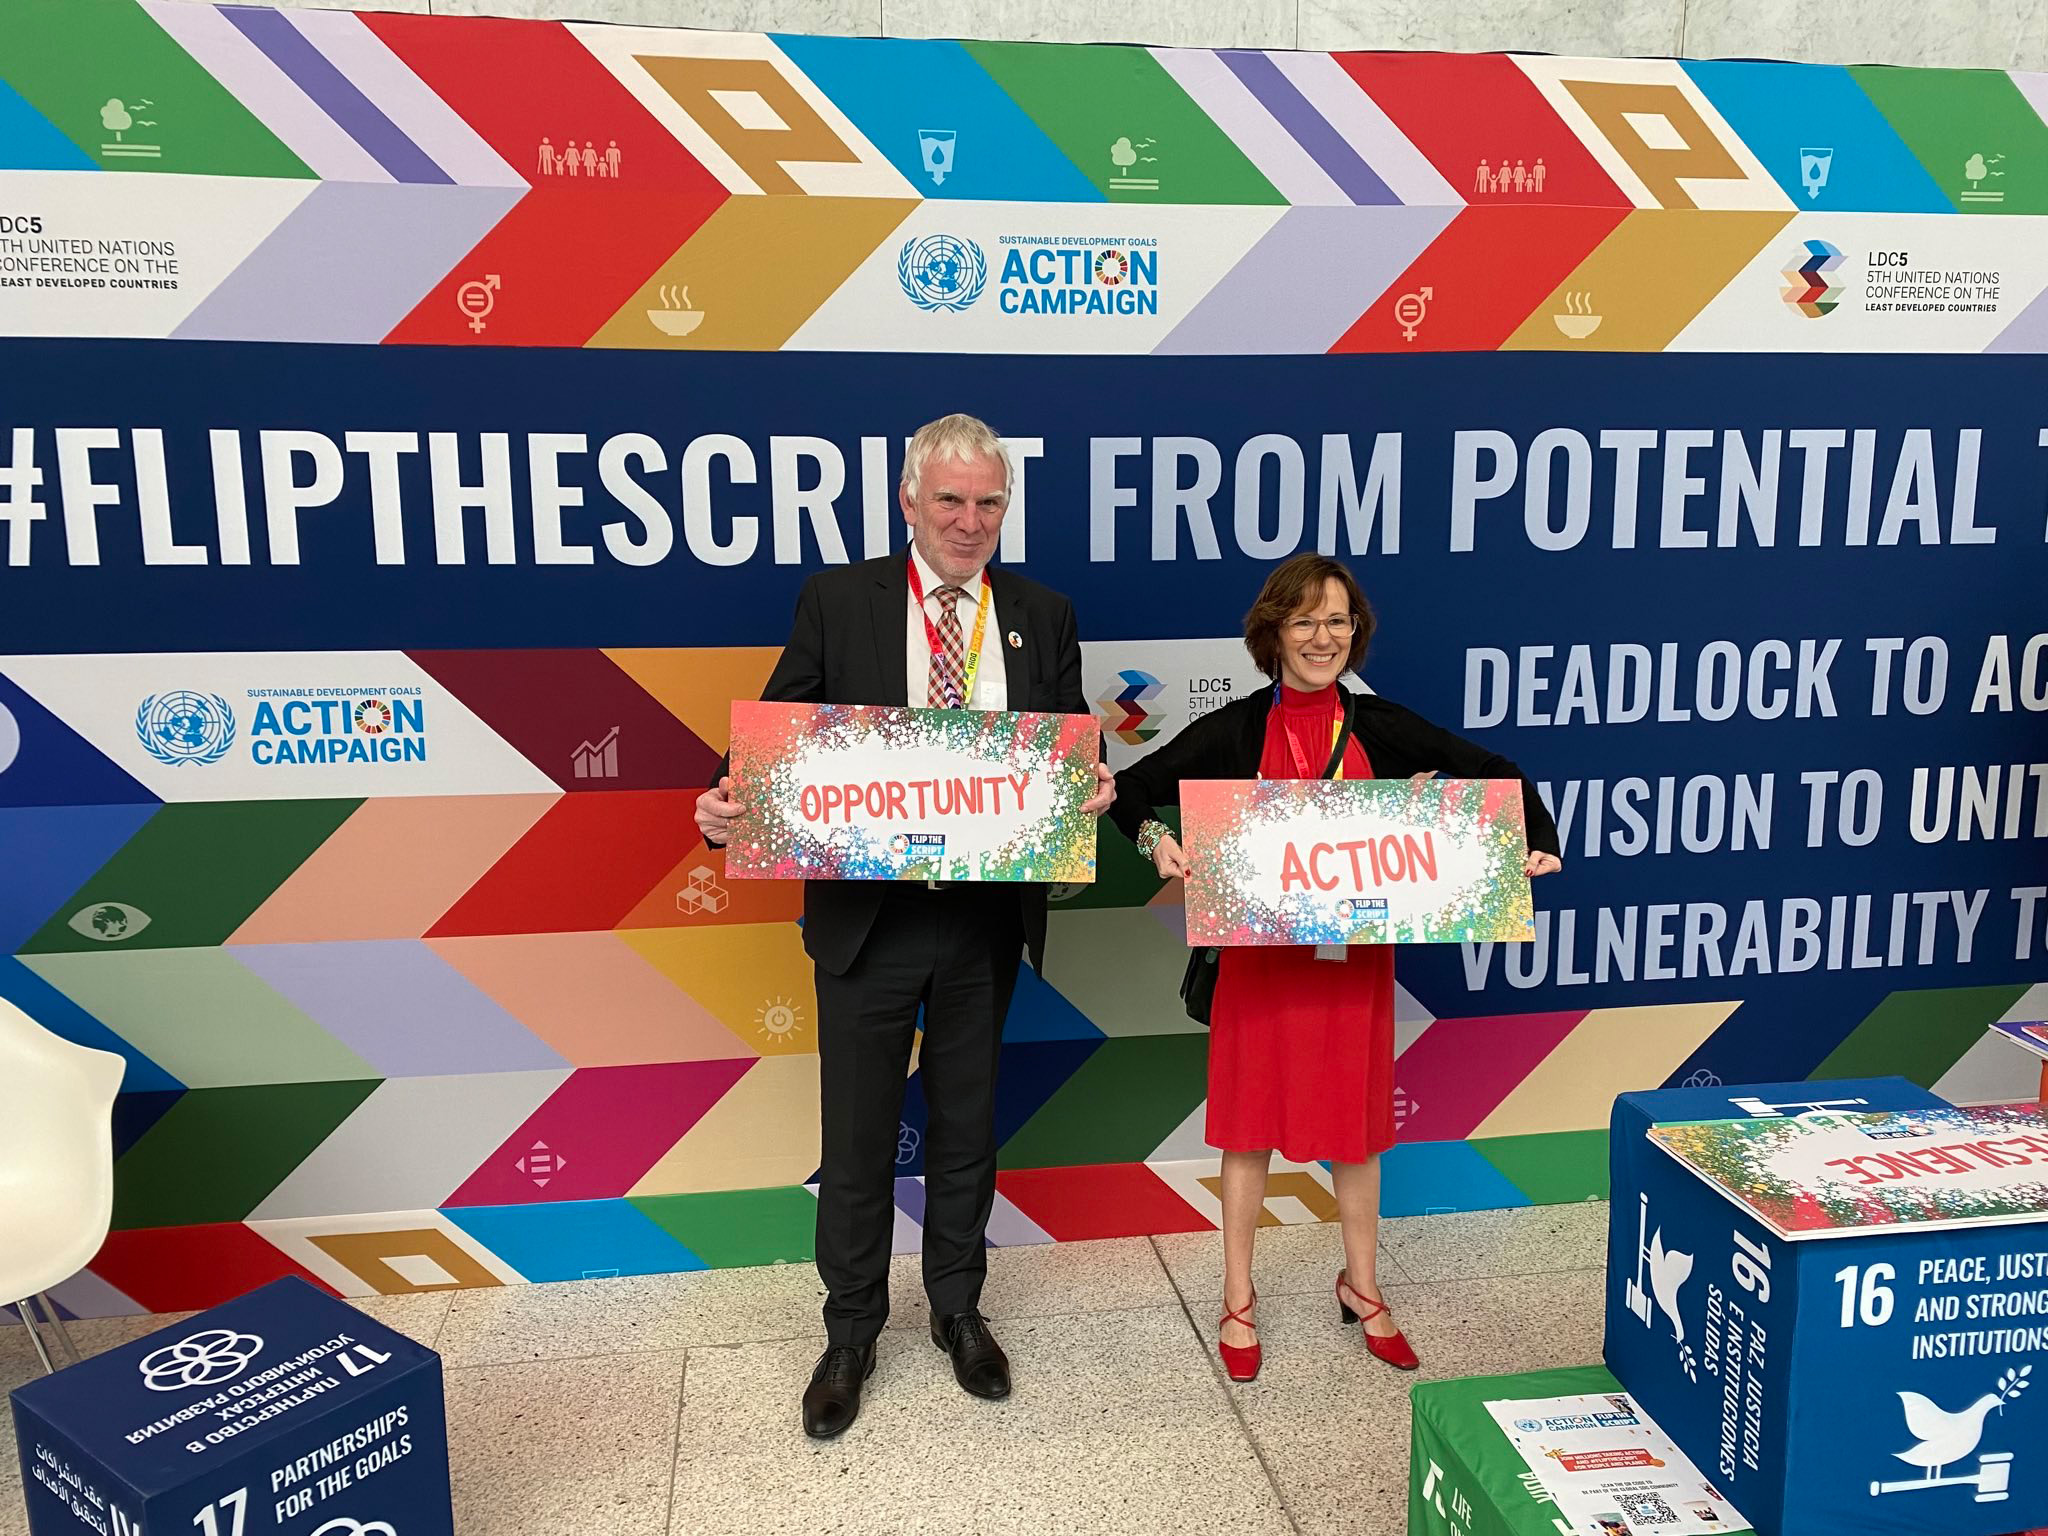 State Secretary Jochen Flasbarth at the SDG Action Campaign stand of the Fifth United Nations Conference on the Least Developed Countries (LDC5) in Doha